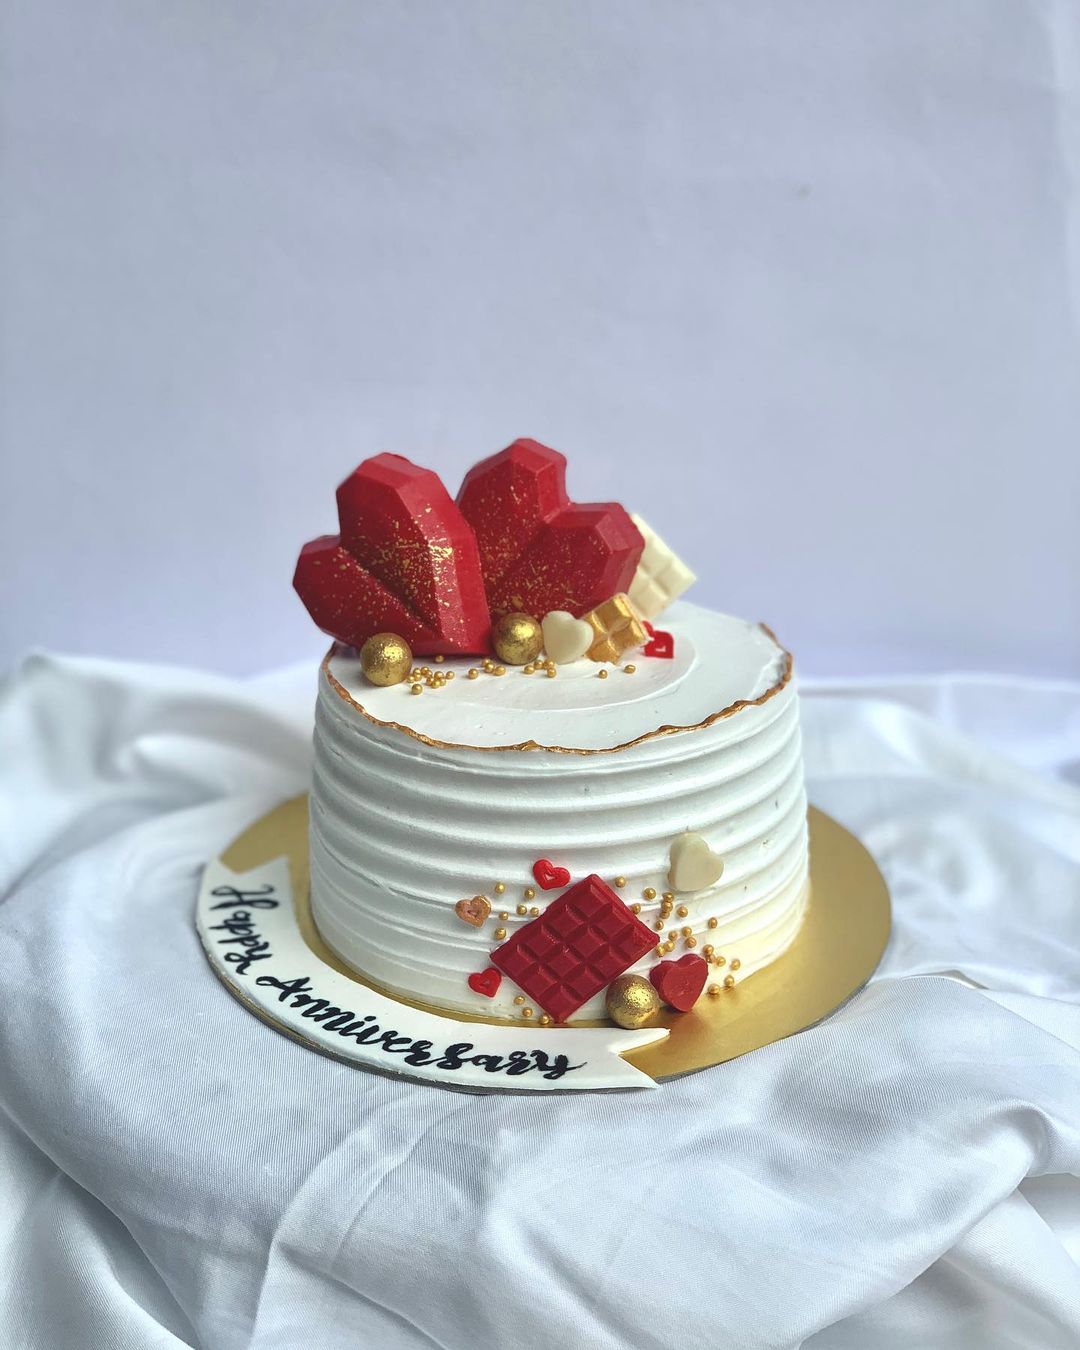 Anniversary Cake For Mom and Dad @499/- | Free Delivery | Bakingo-thanhphatduhoc.com.vn